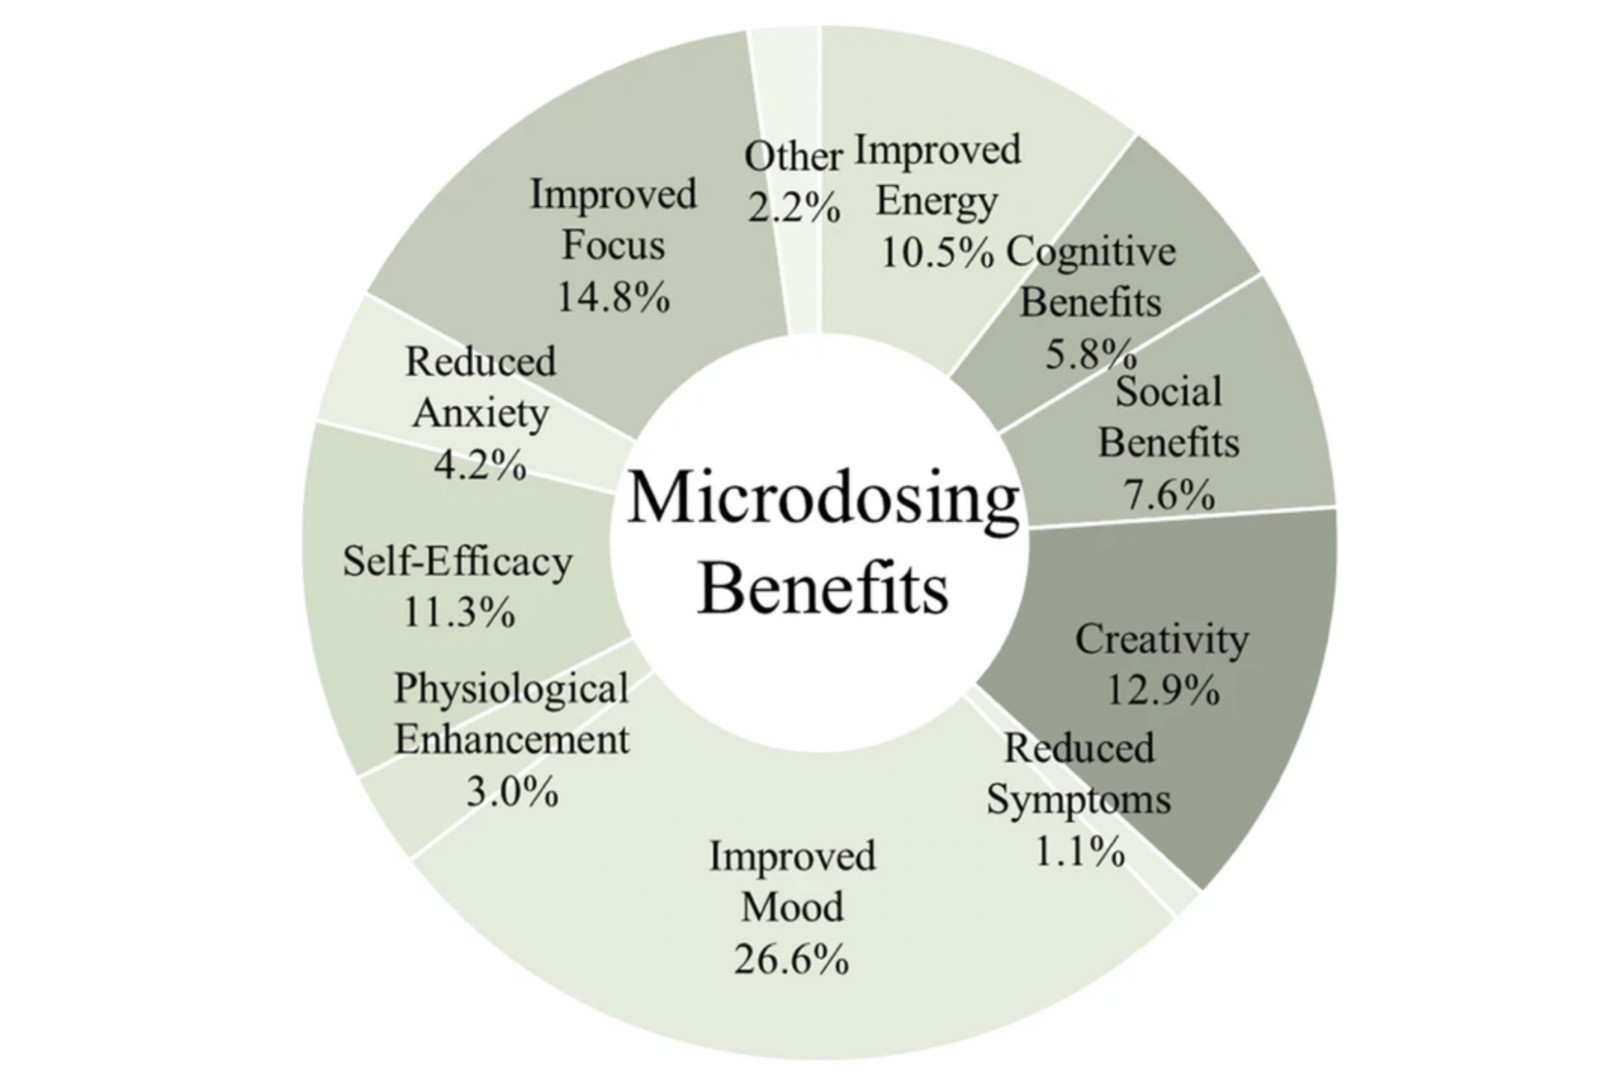 The benefits of microdosing